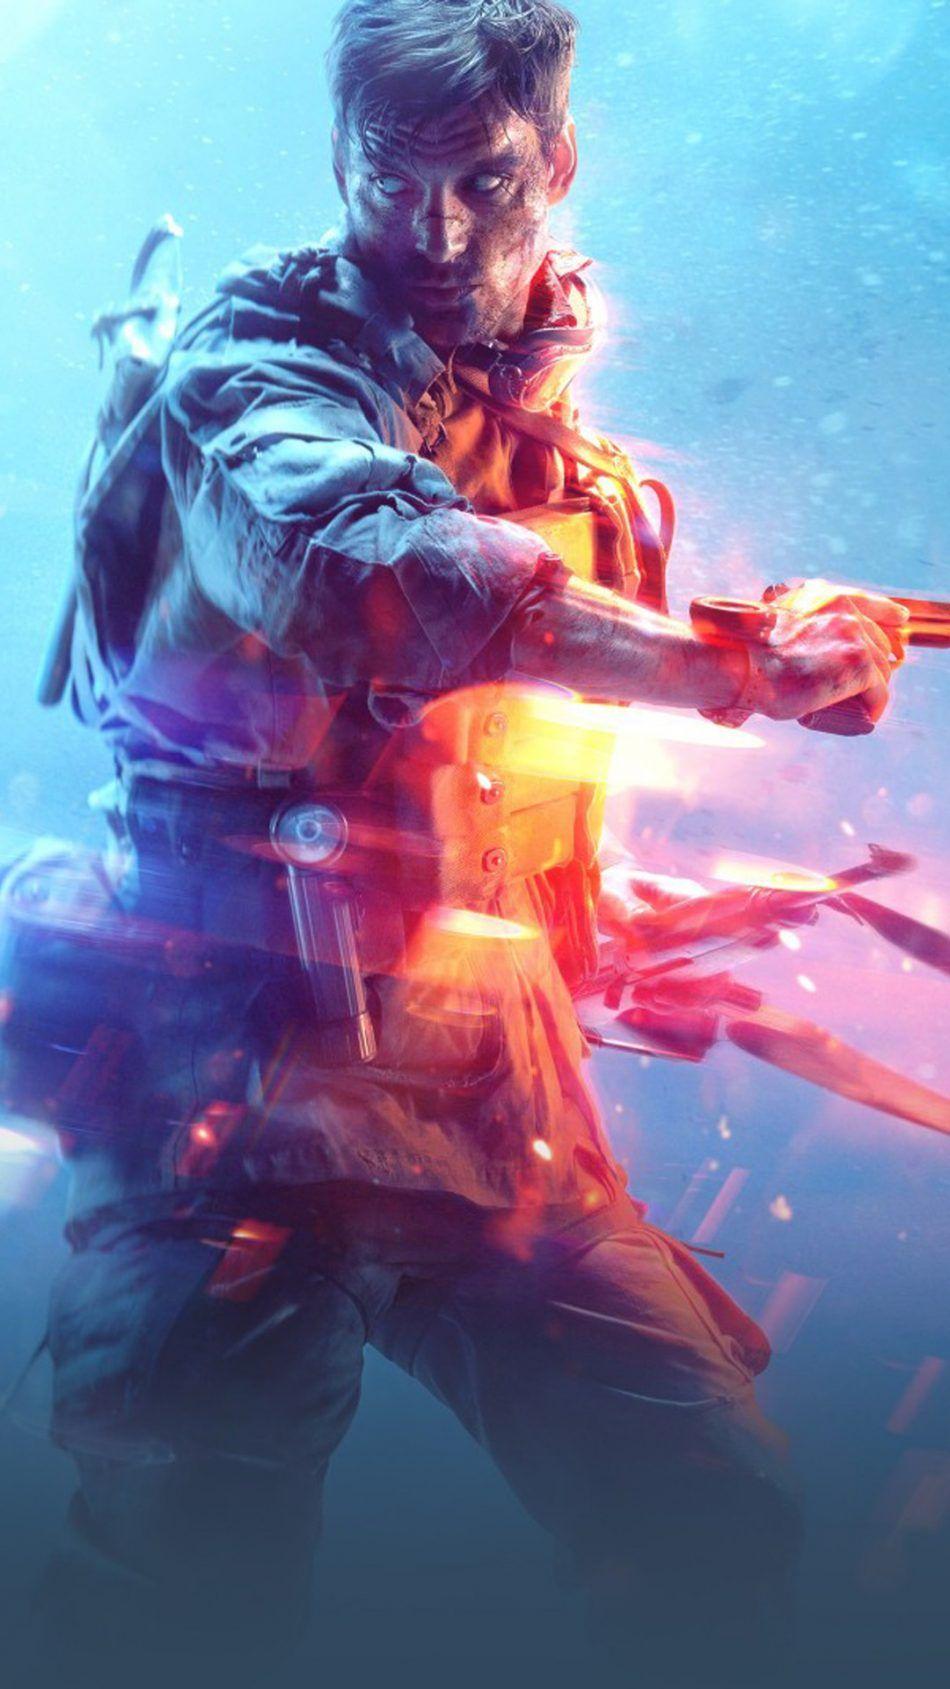 4k Wallpaper Steep Extreme E Best Games Playstation Xbox One